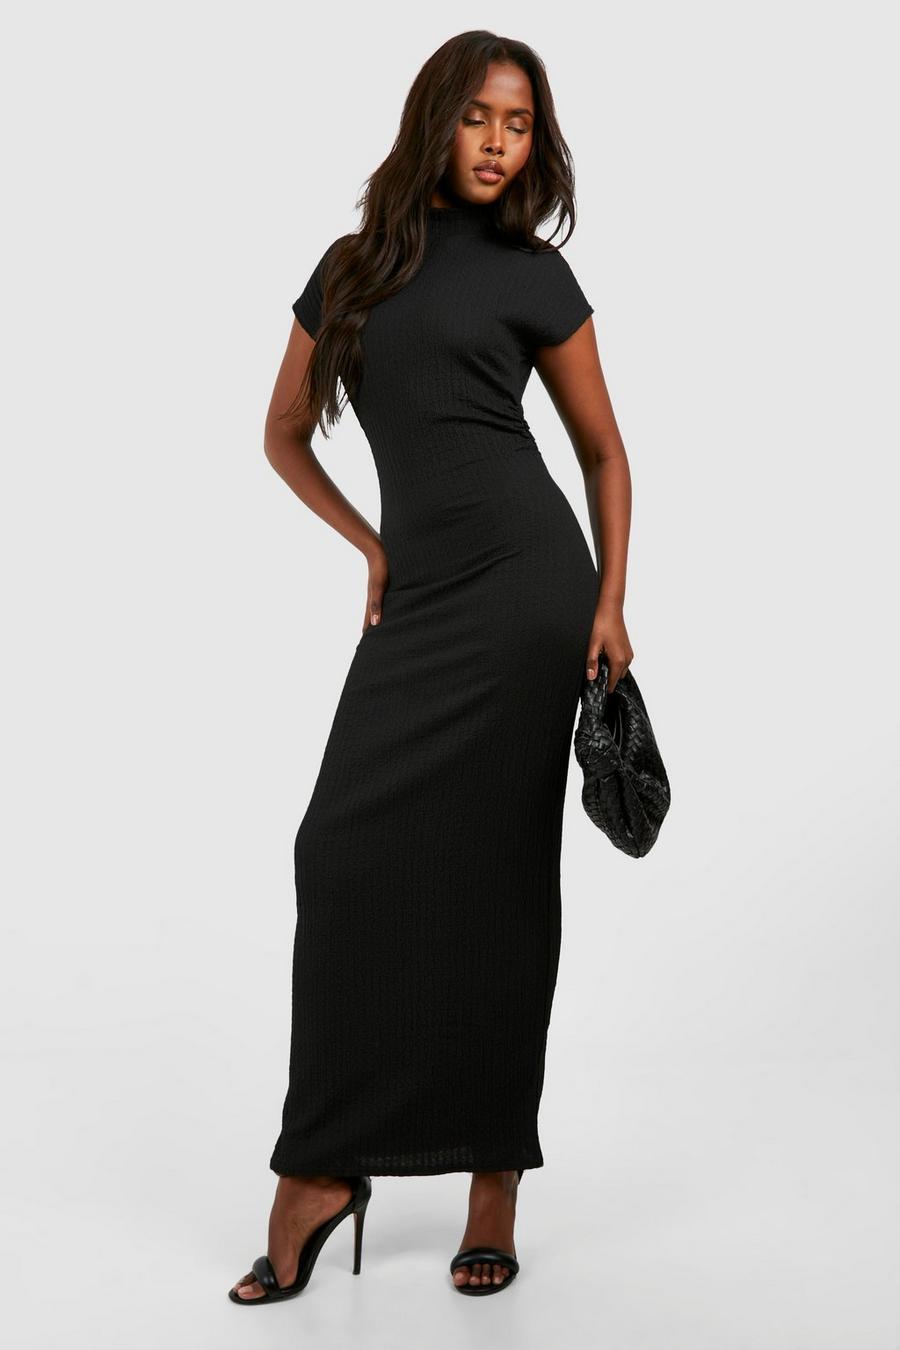 Black Crinkle High Neck Rouched Maxi Dress